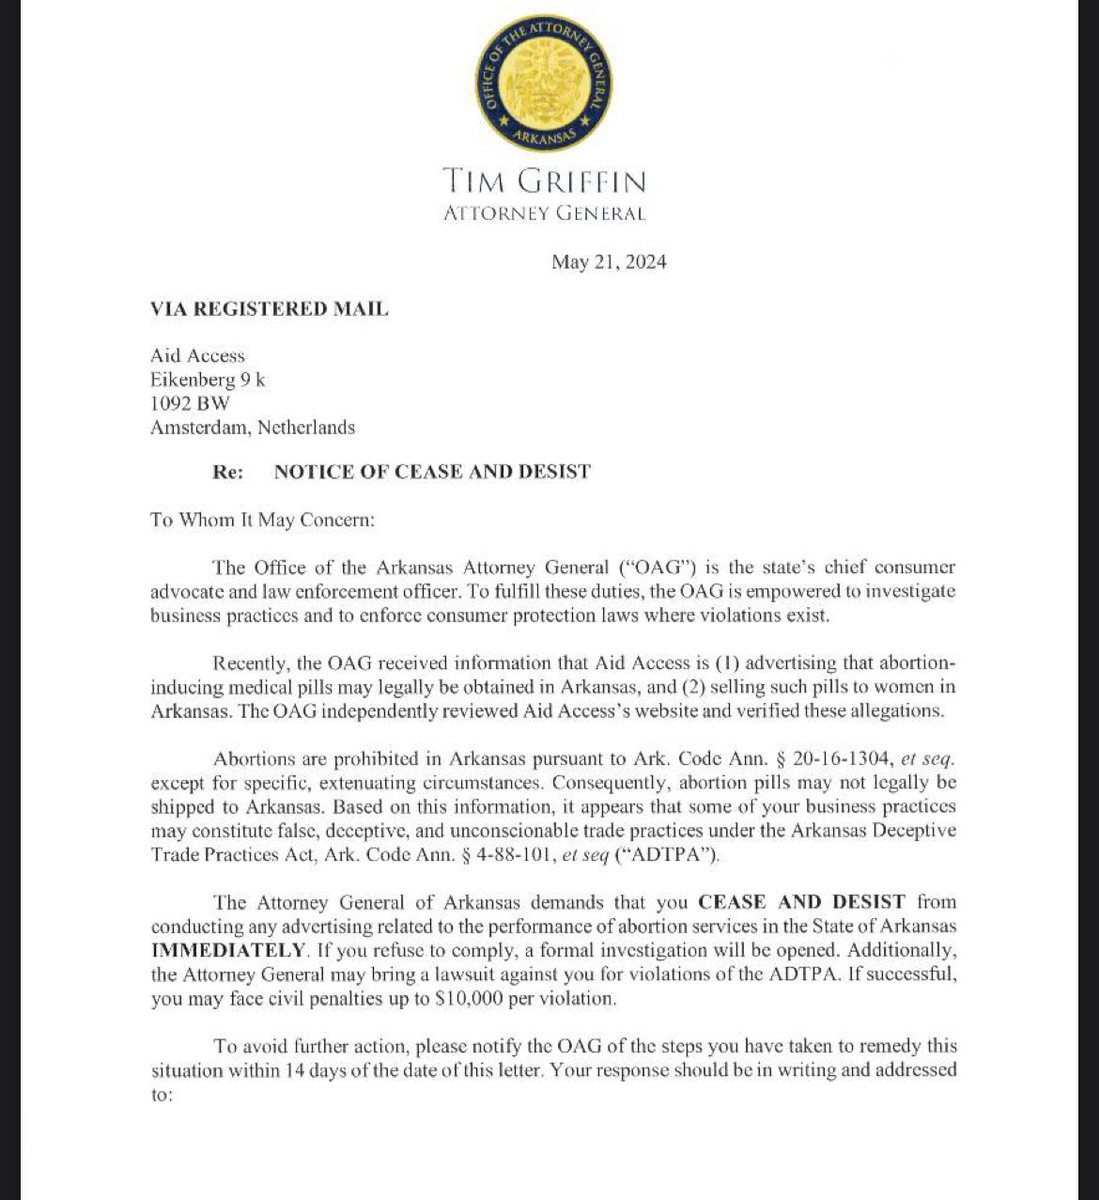 NEW: Arkansas Attorney General Tim Griffin has issued cease and desist letters to two clinics offering abortion pills, including Aid Access — threatening a lawsuit and $10k in fines if they don’t stop advertising to pregnant women in the state.